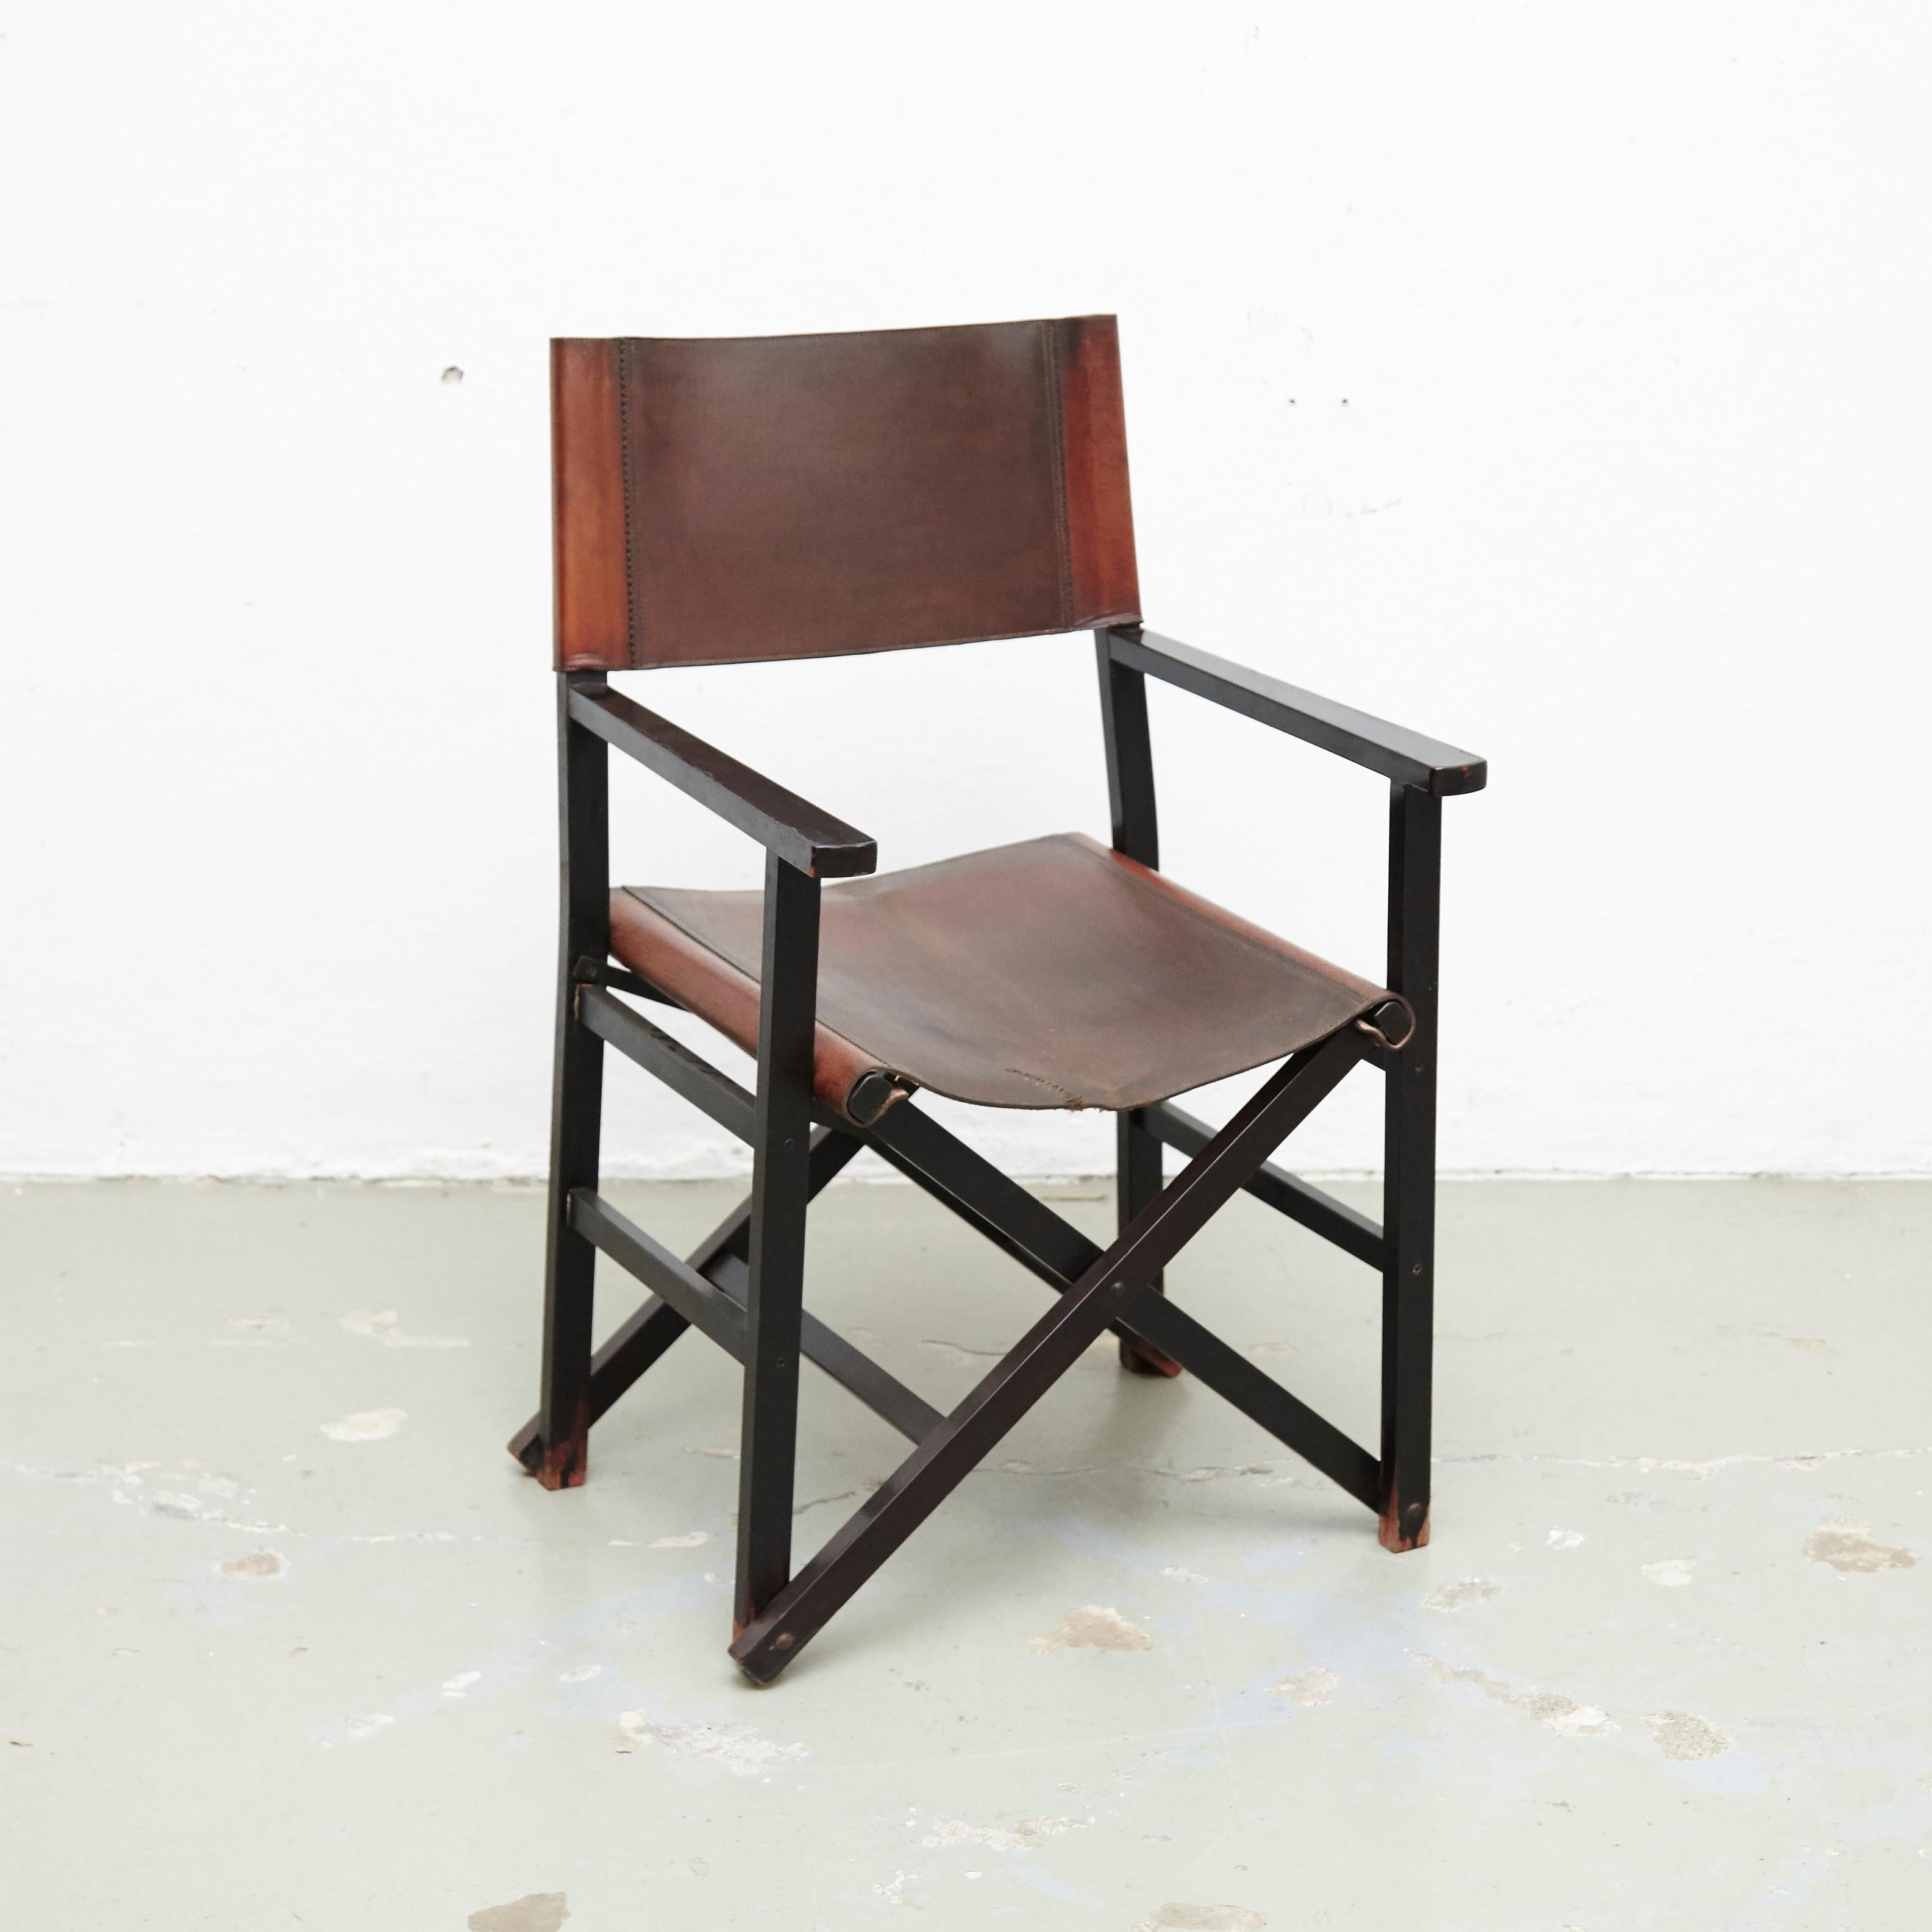 Spanish Miguel Mila Set of 4 Leather Folding Chairs by Gres Edition, circa 1960